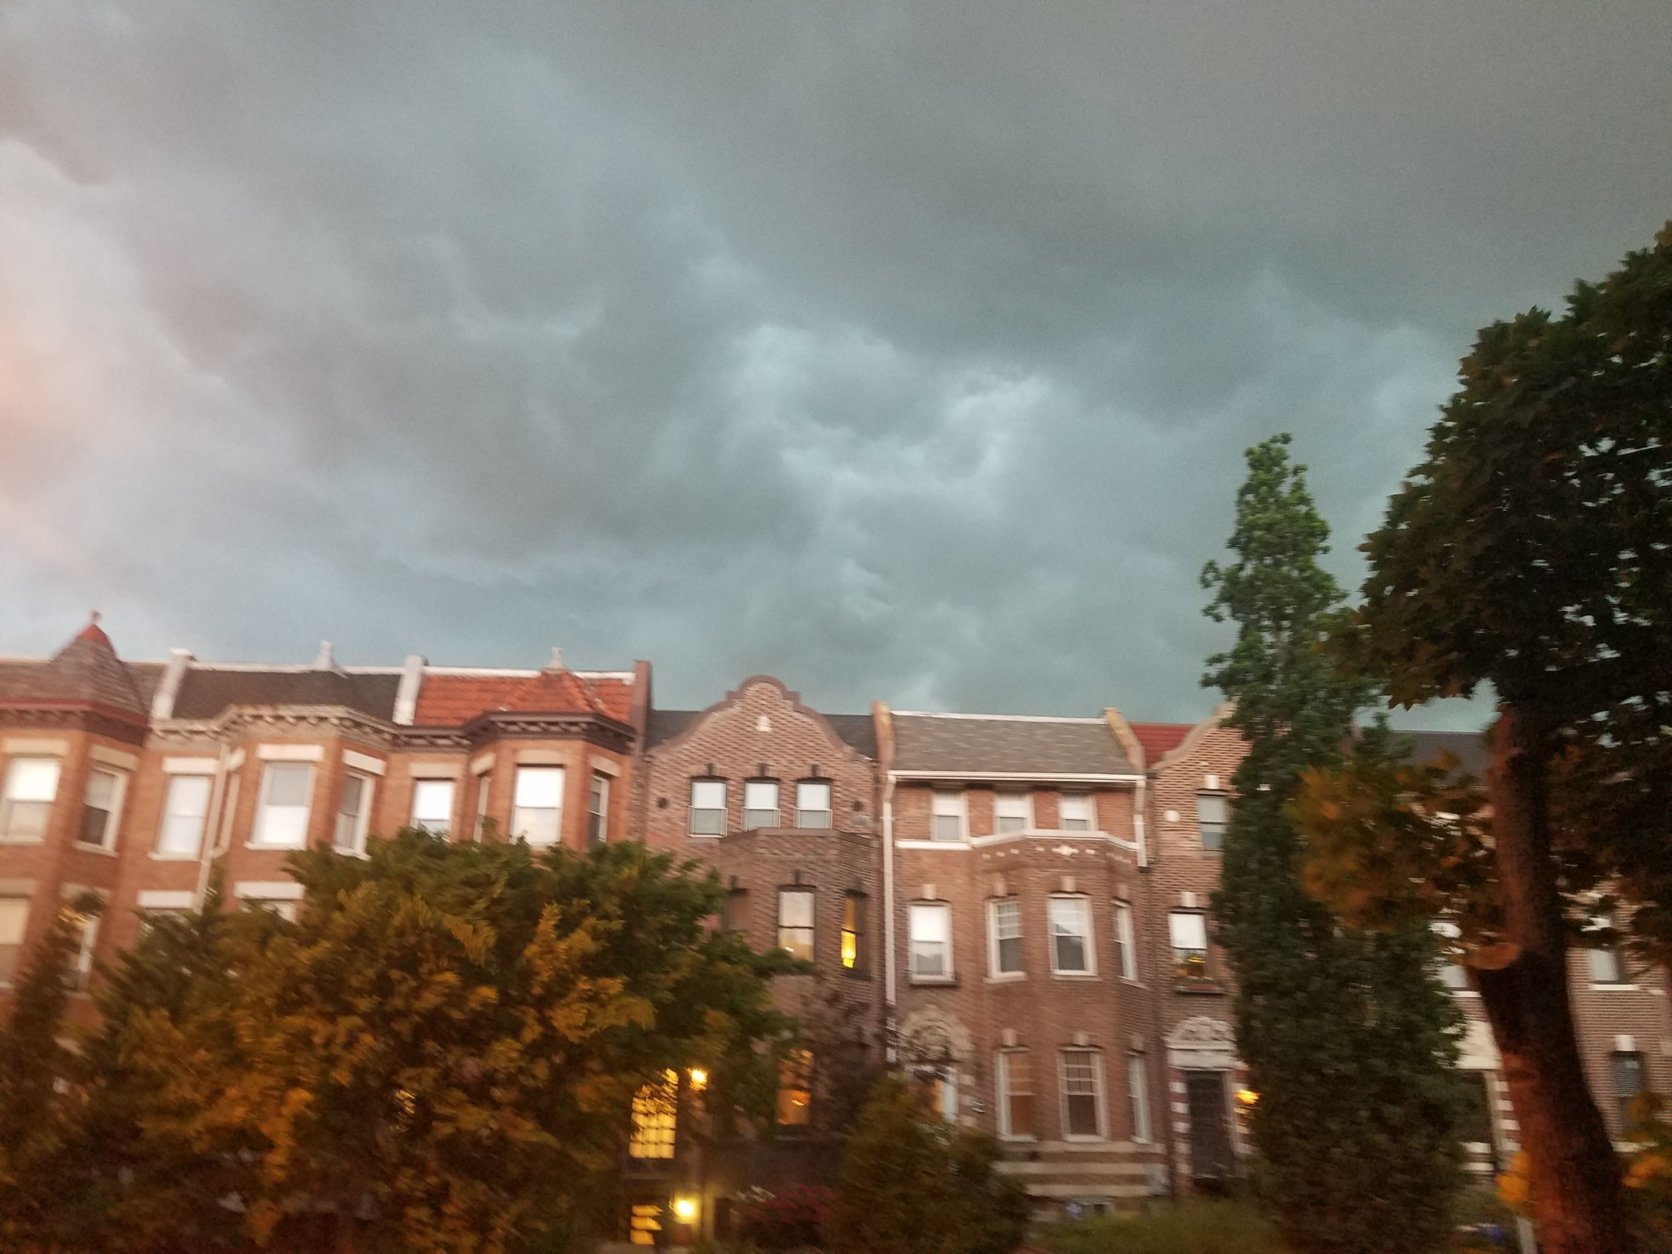 Storm clouds gather over Northwest Washington, D.C. (WTOP/Will Vitka)